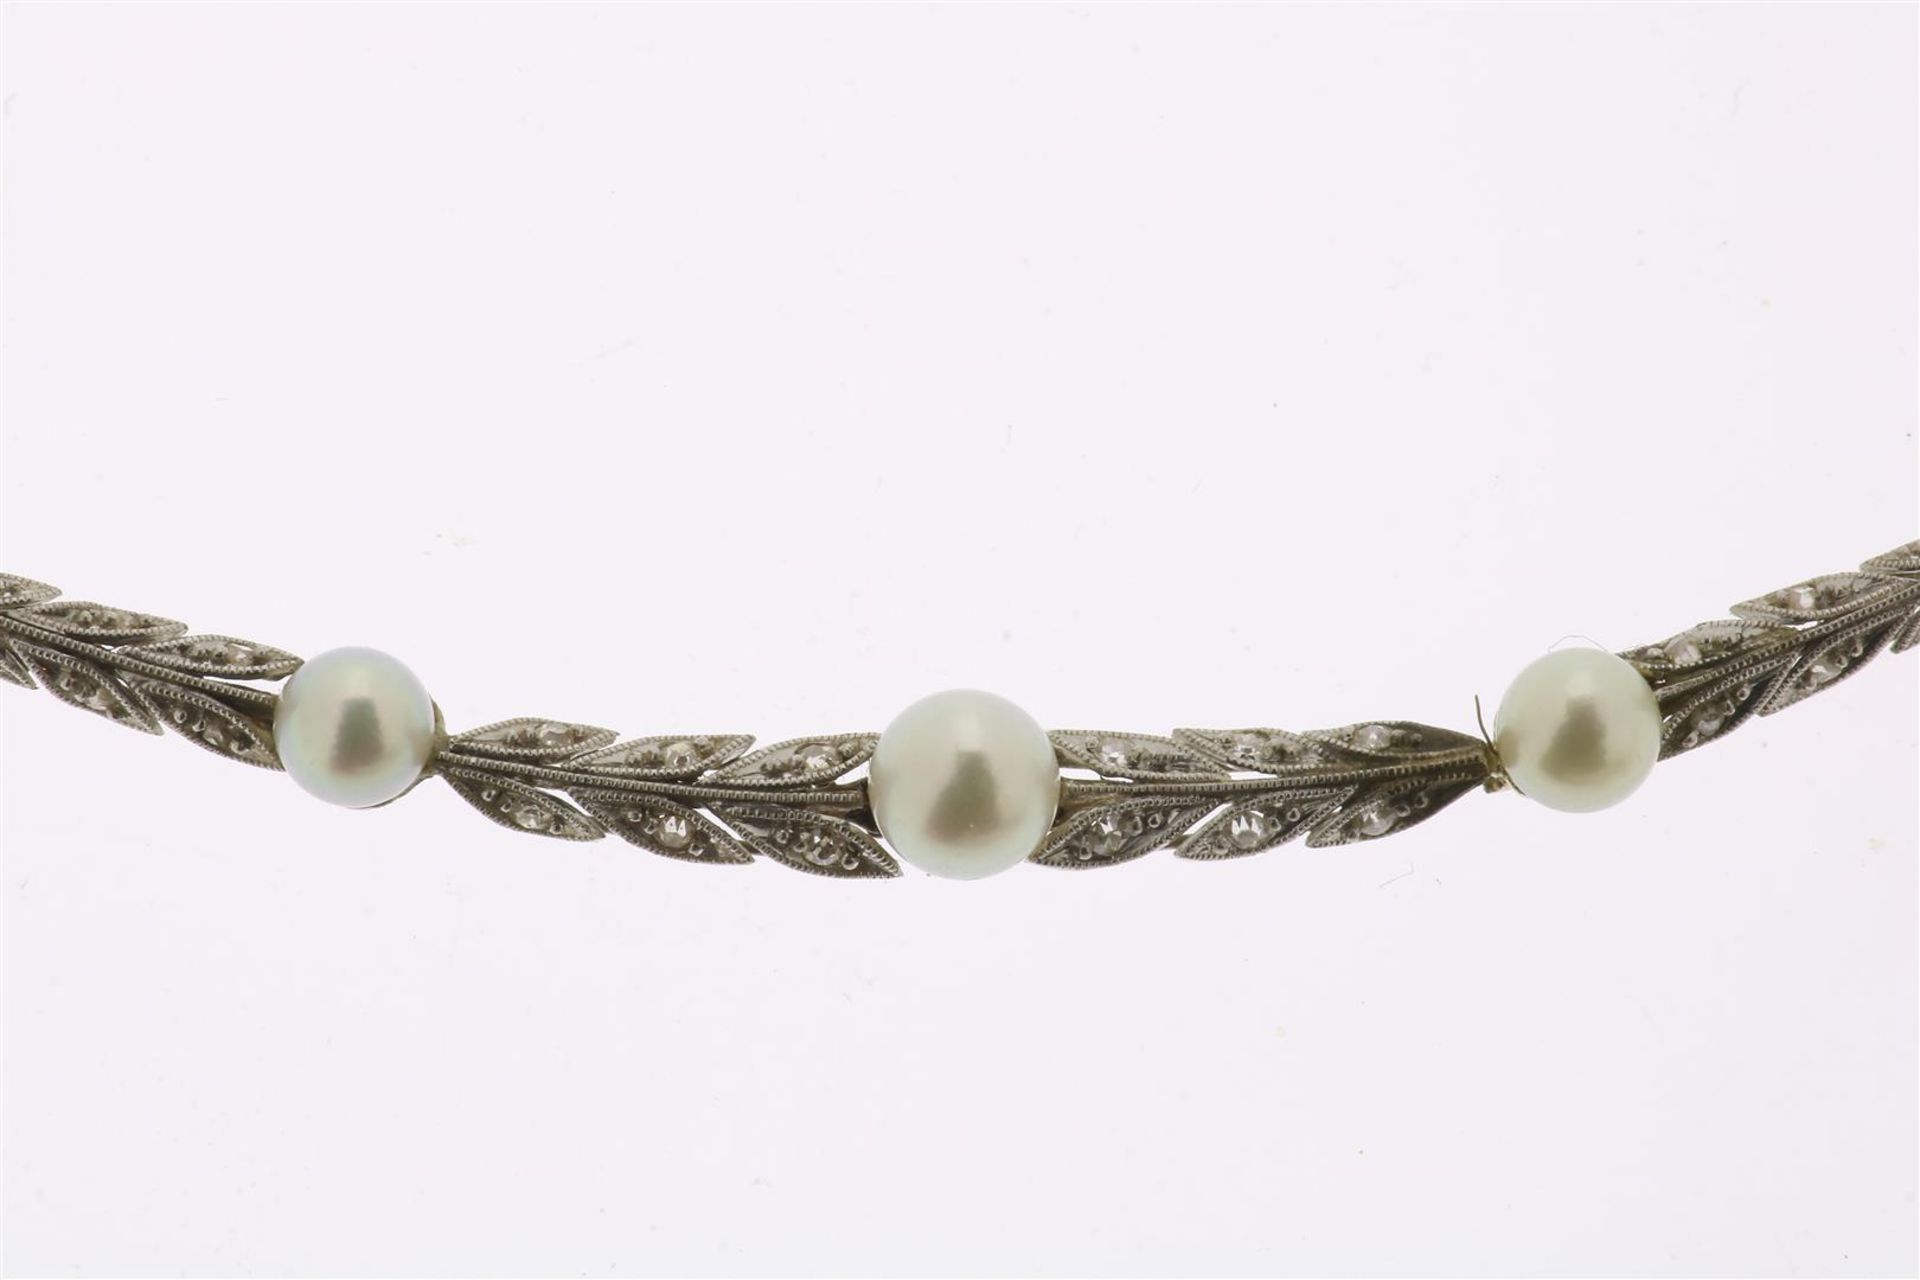 Platinum necklase with pearls and diamonts, 19th century